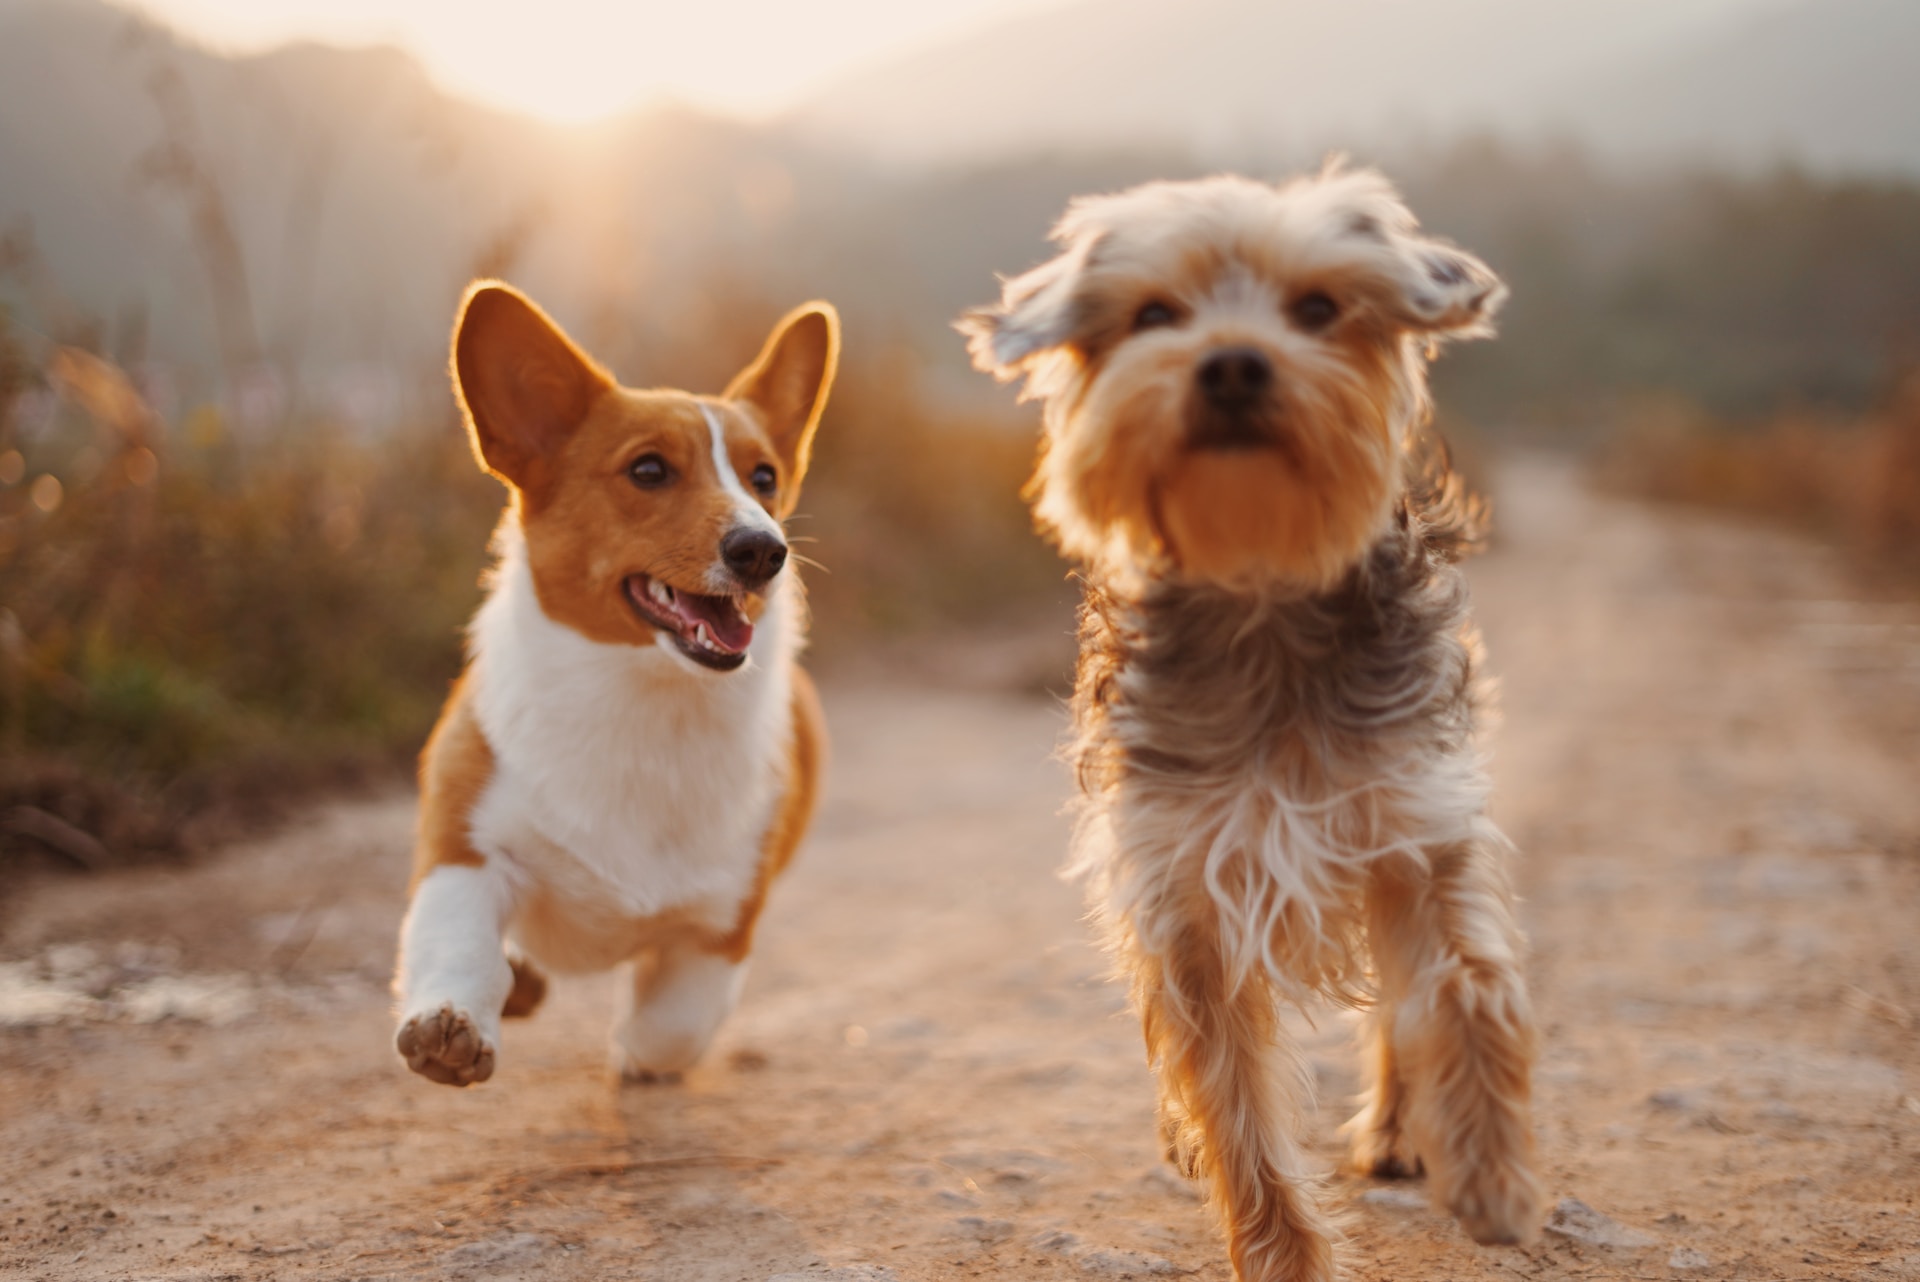 A Corgi and Terrier puppy playing together outdoors